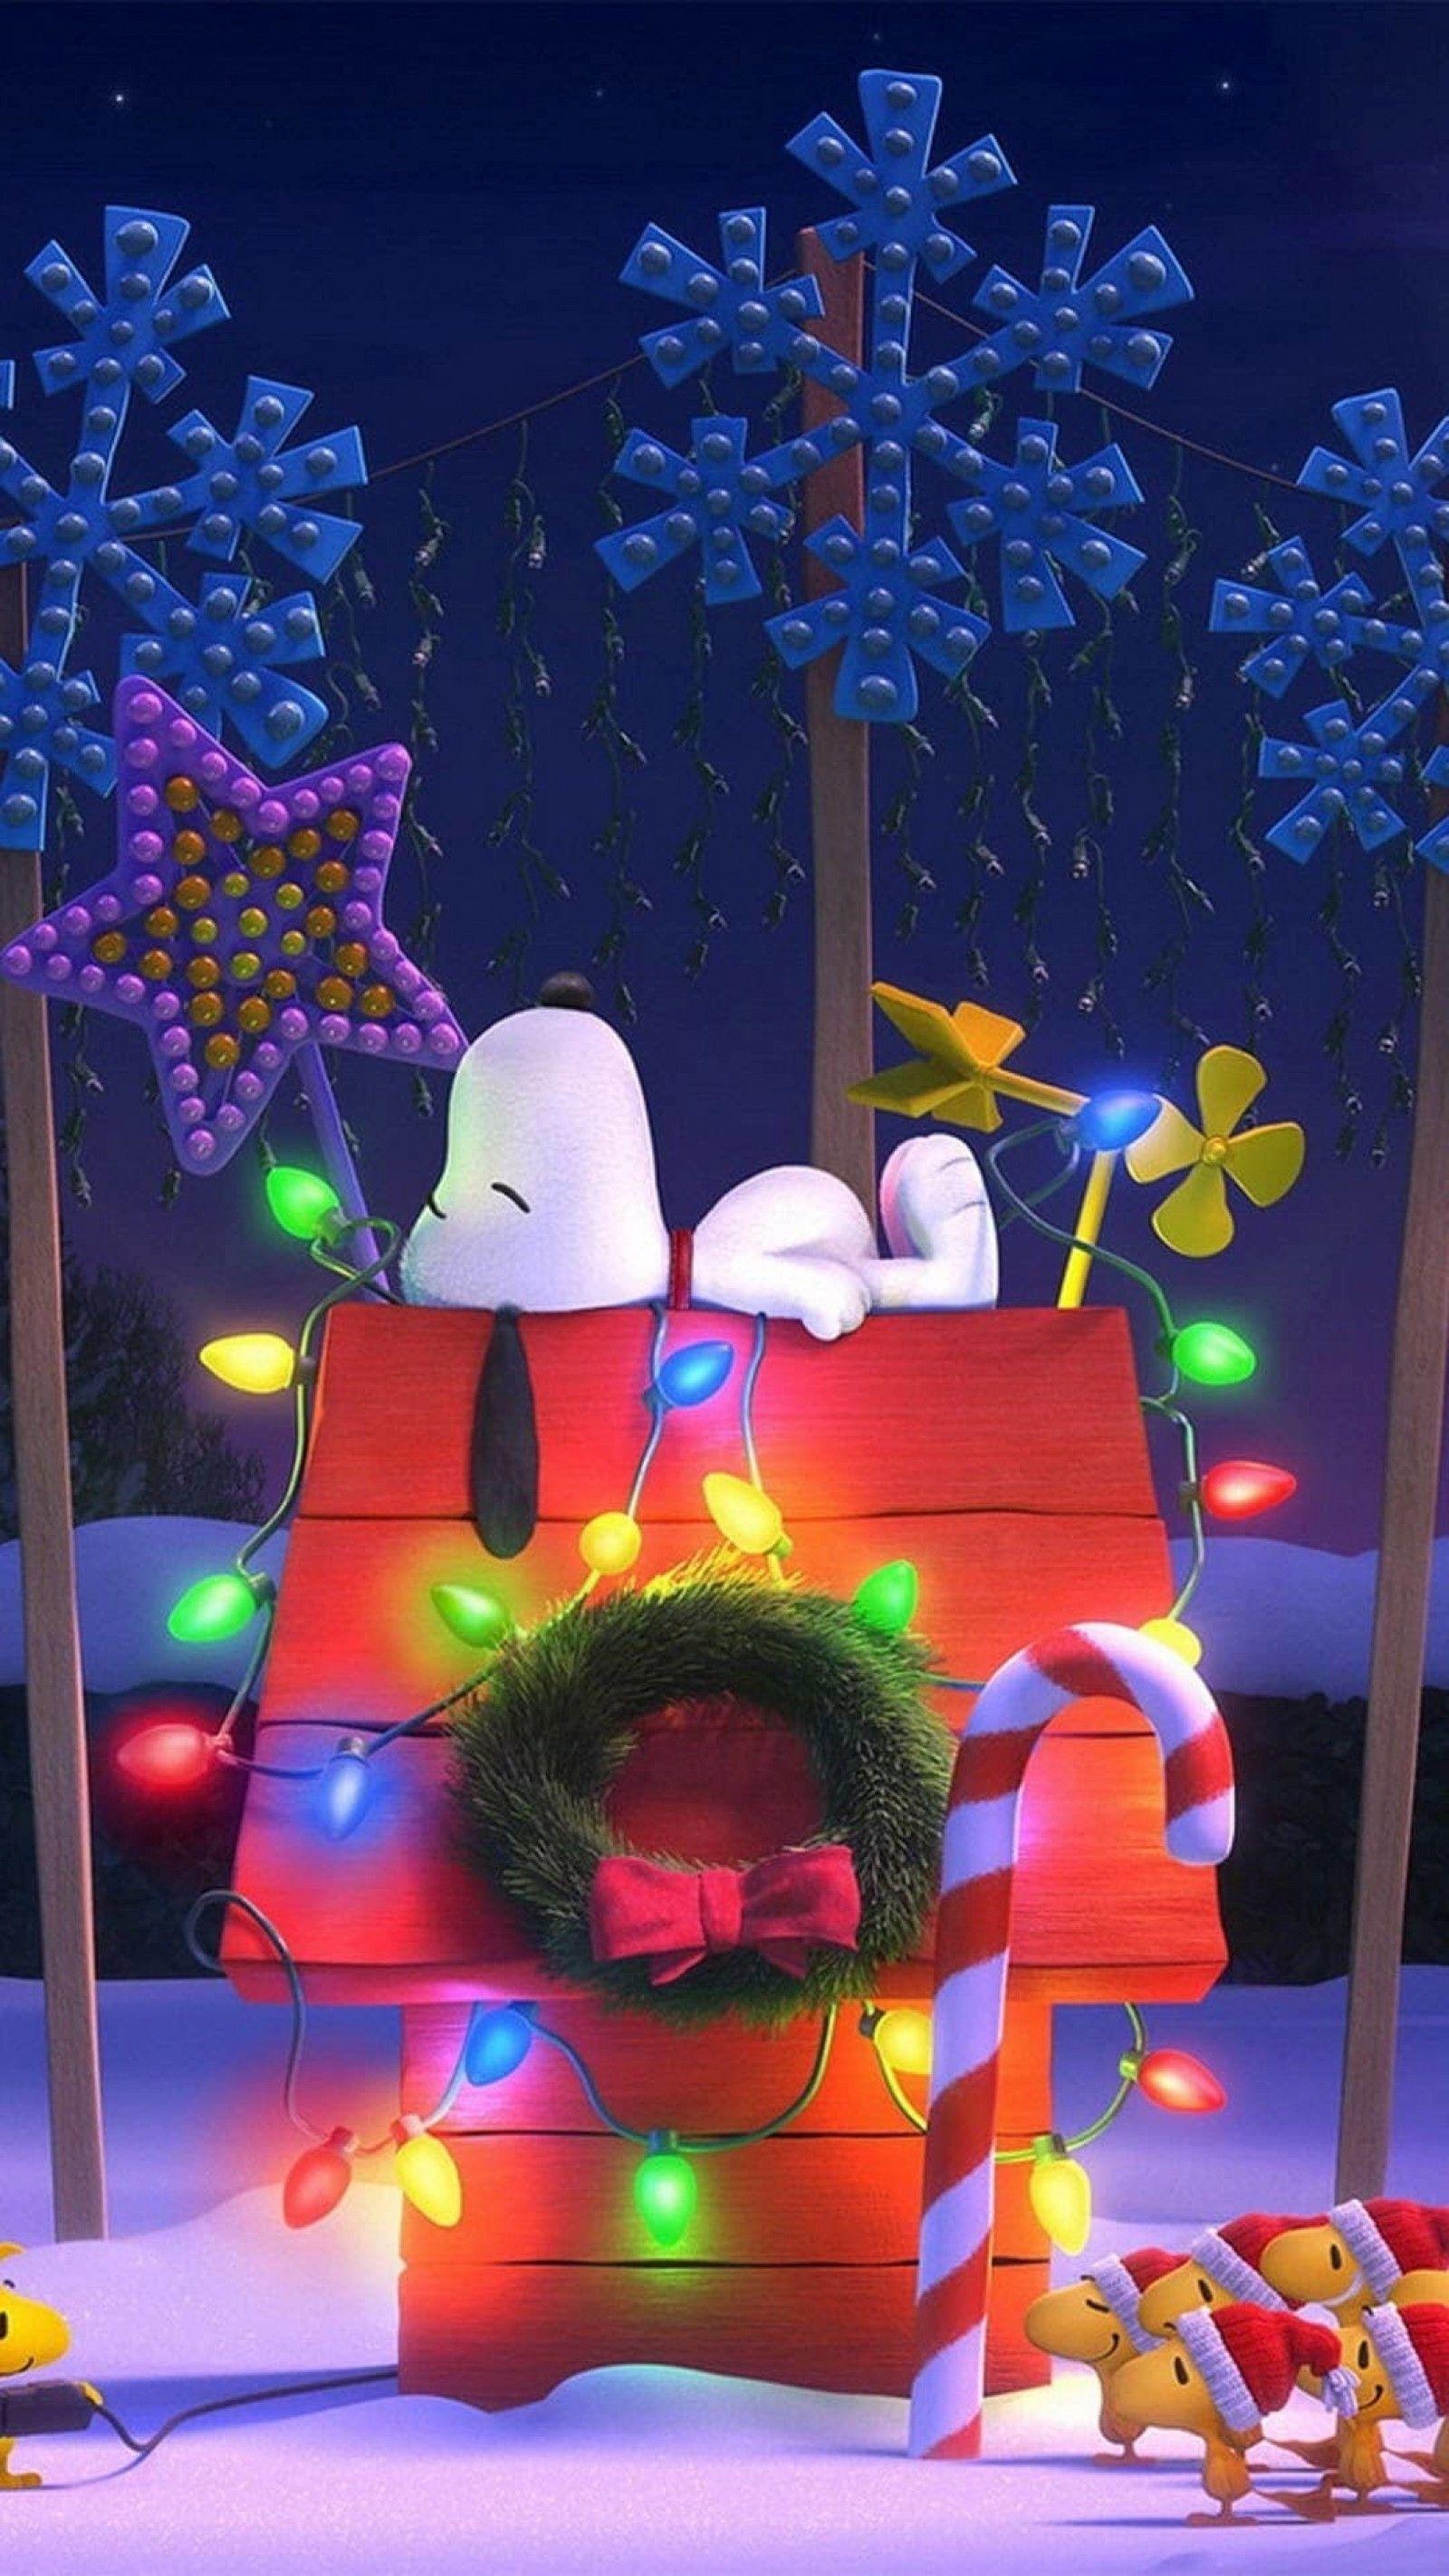 Snoopy Christmas Iphone Wallpaper